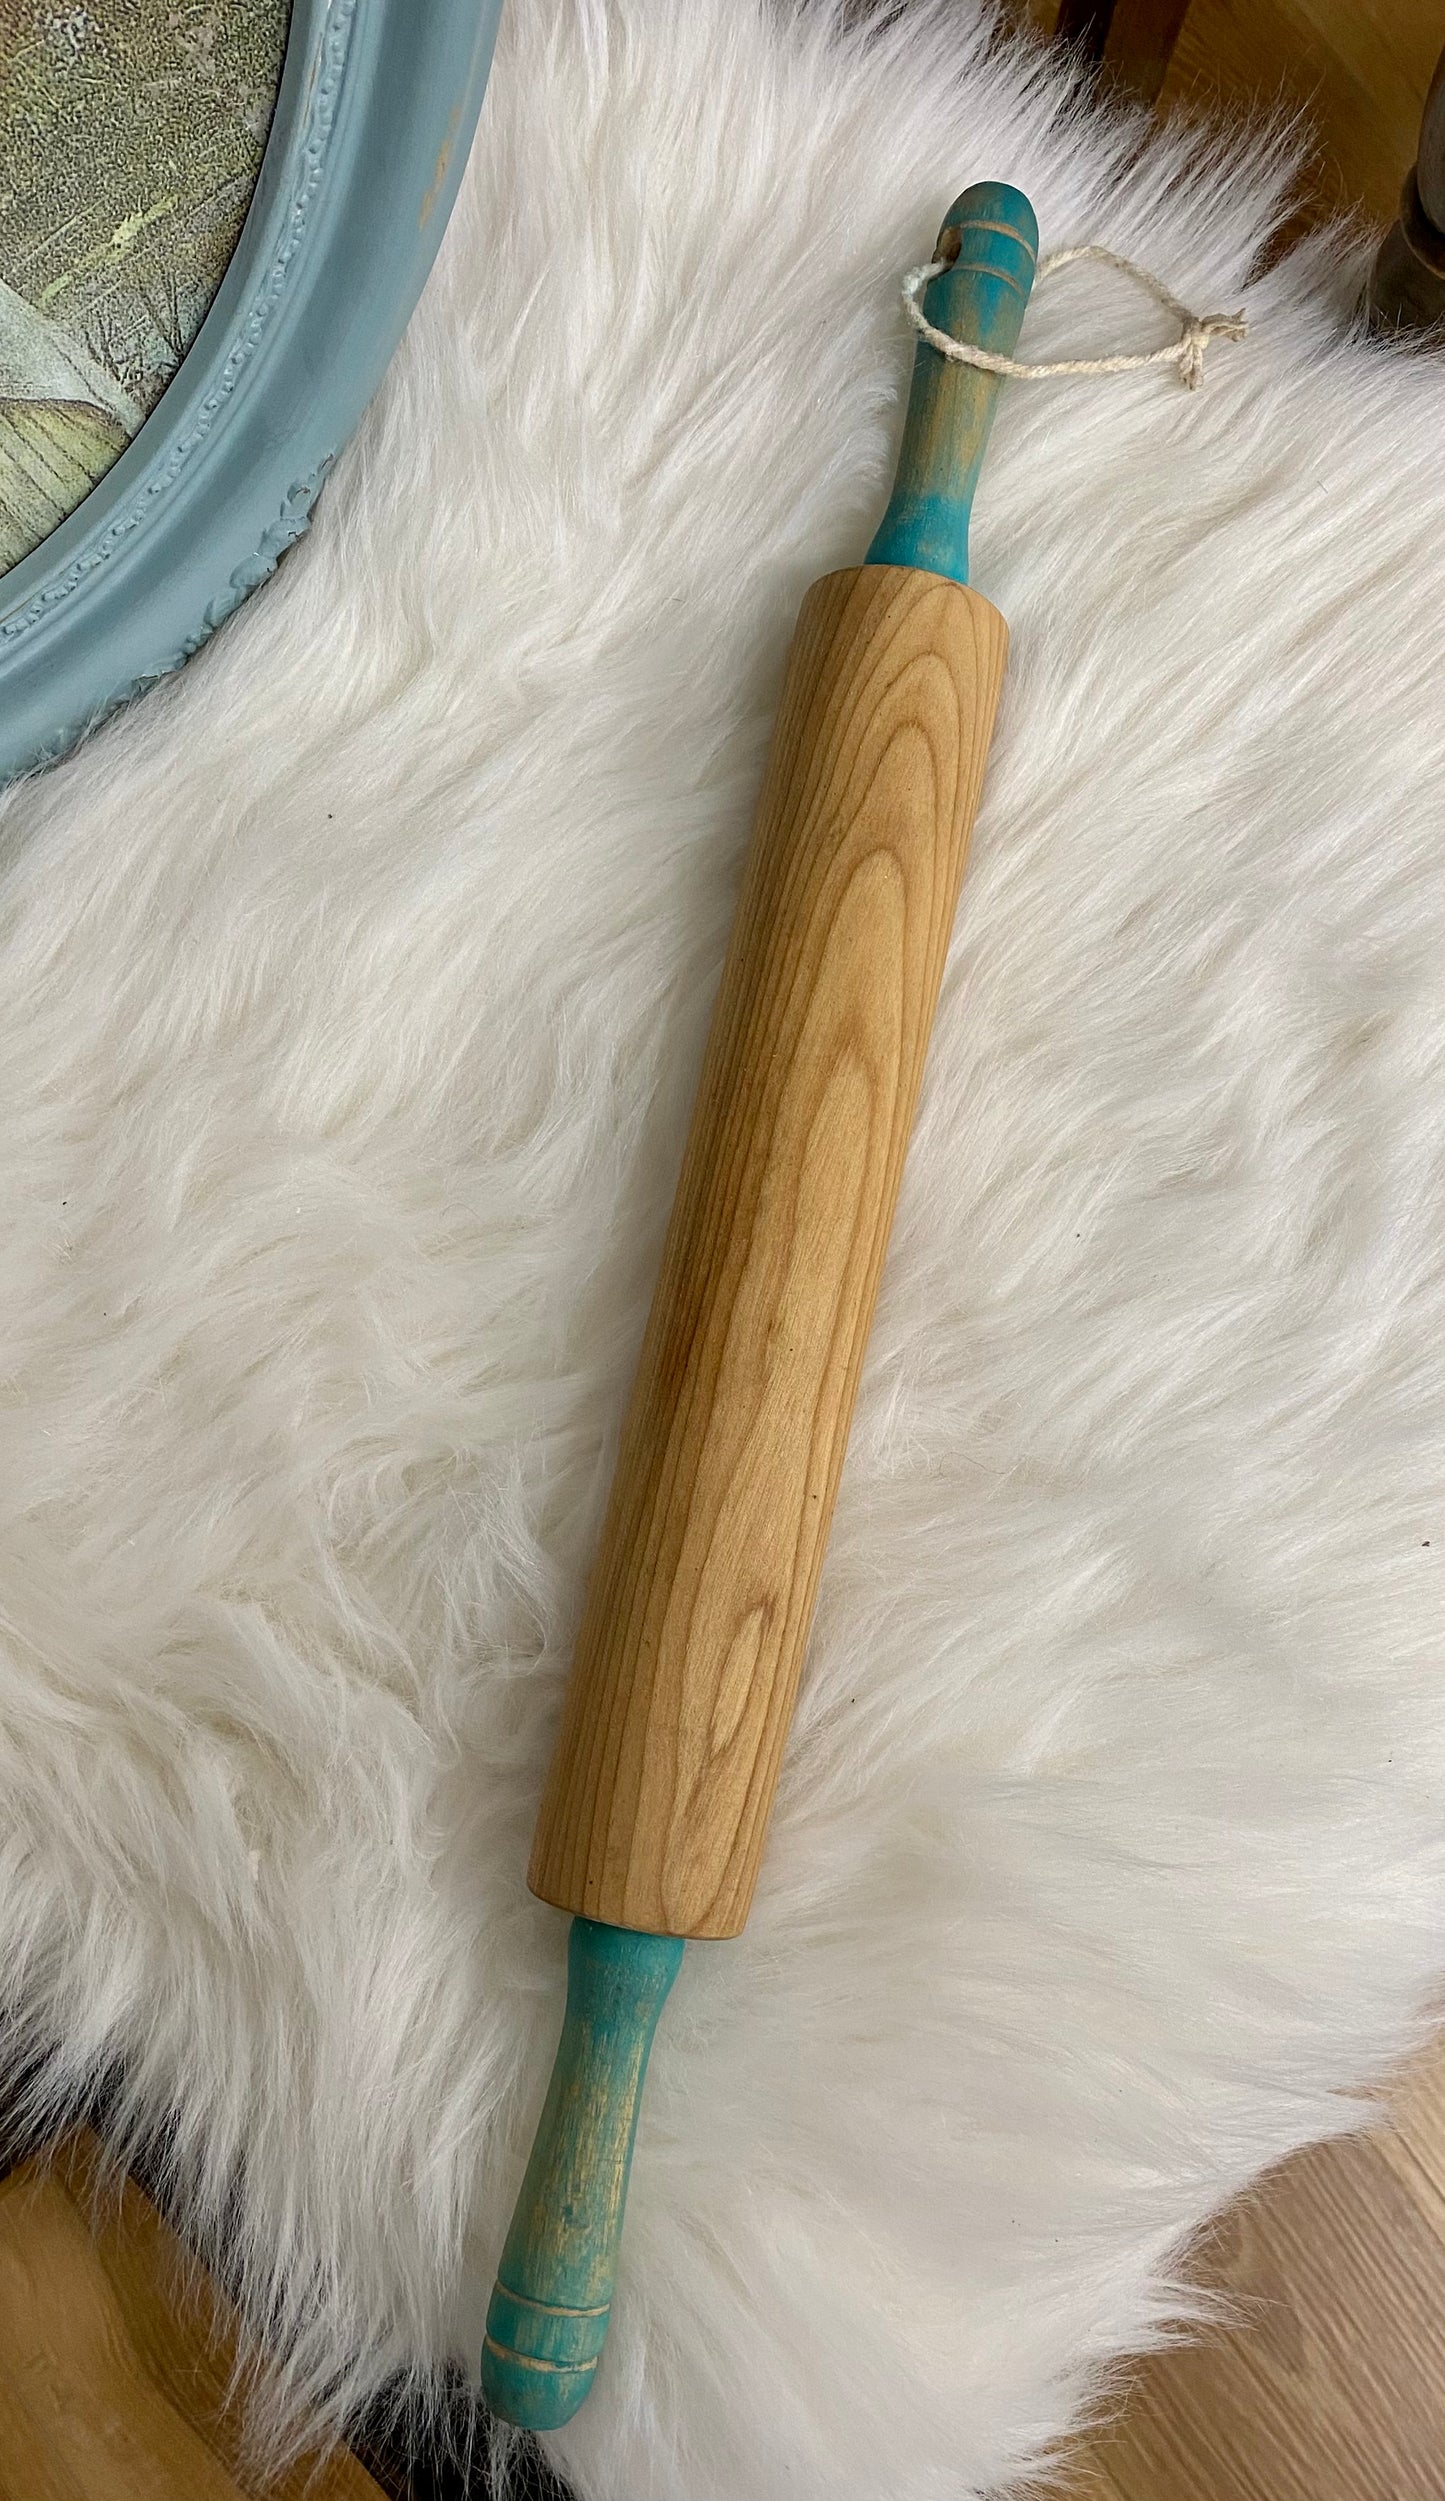 Vintage Wood Rolling Pin with Aqua Blue Handles